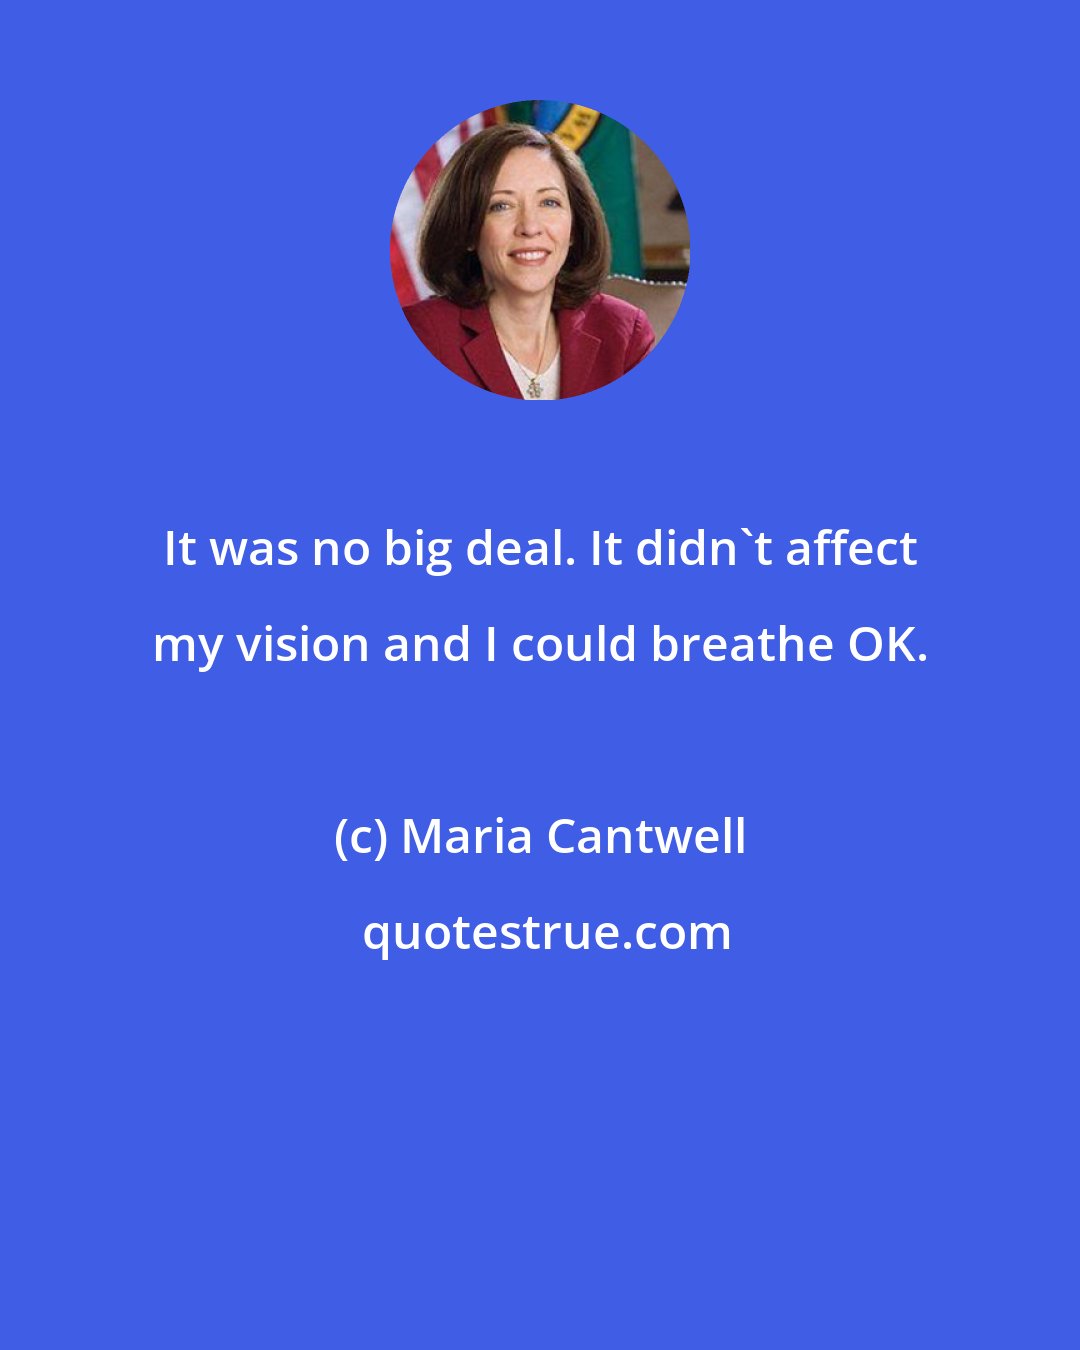 Maria Cantwell: It was no big deal. It didn't affect my vision and I could breathe OK.